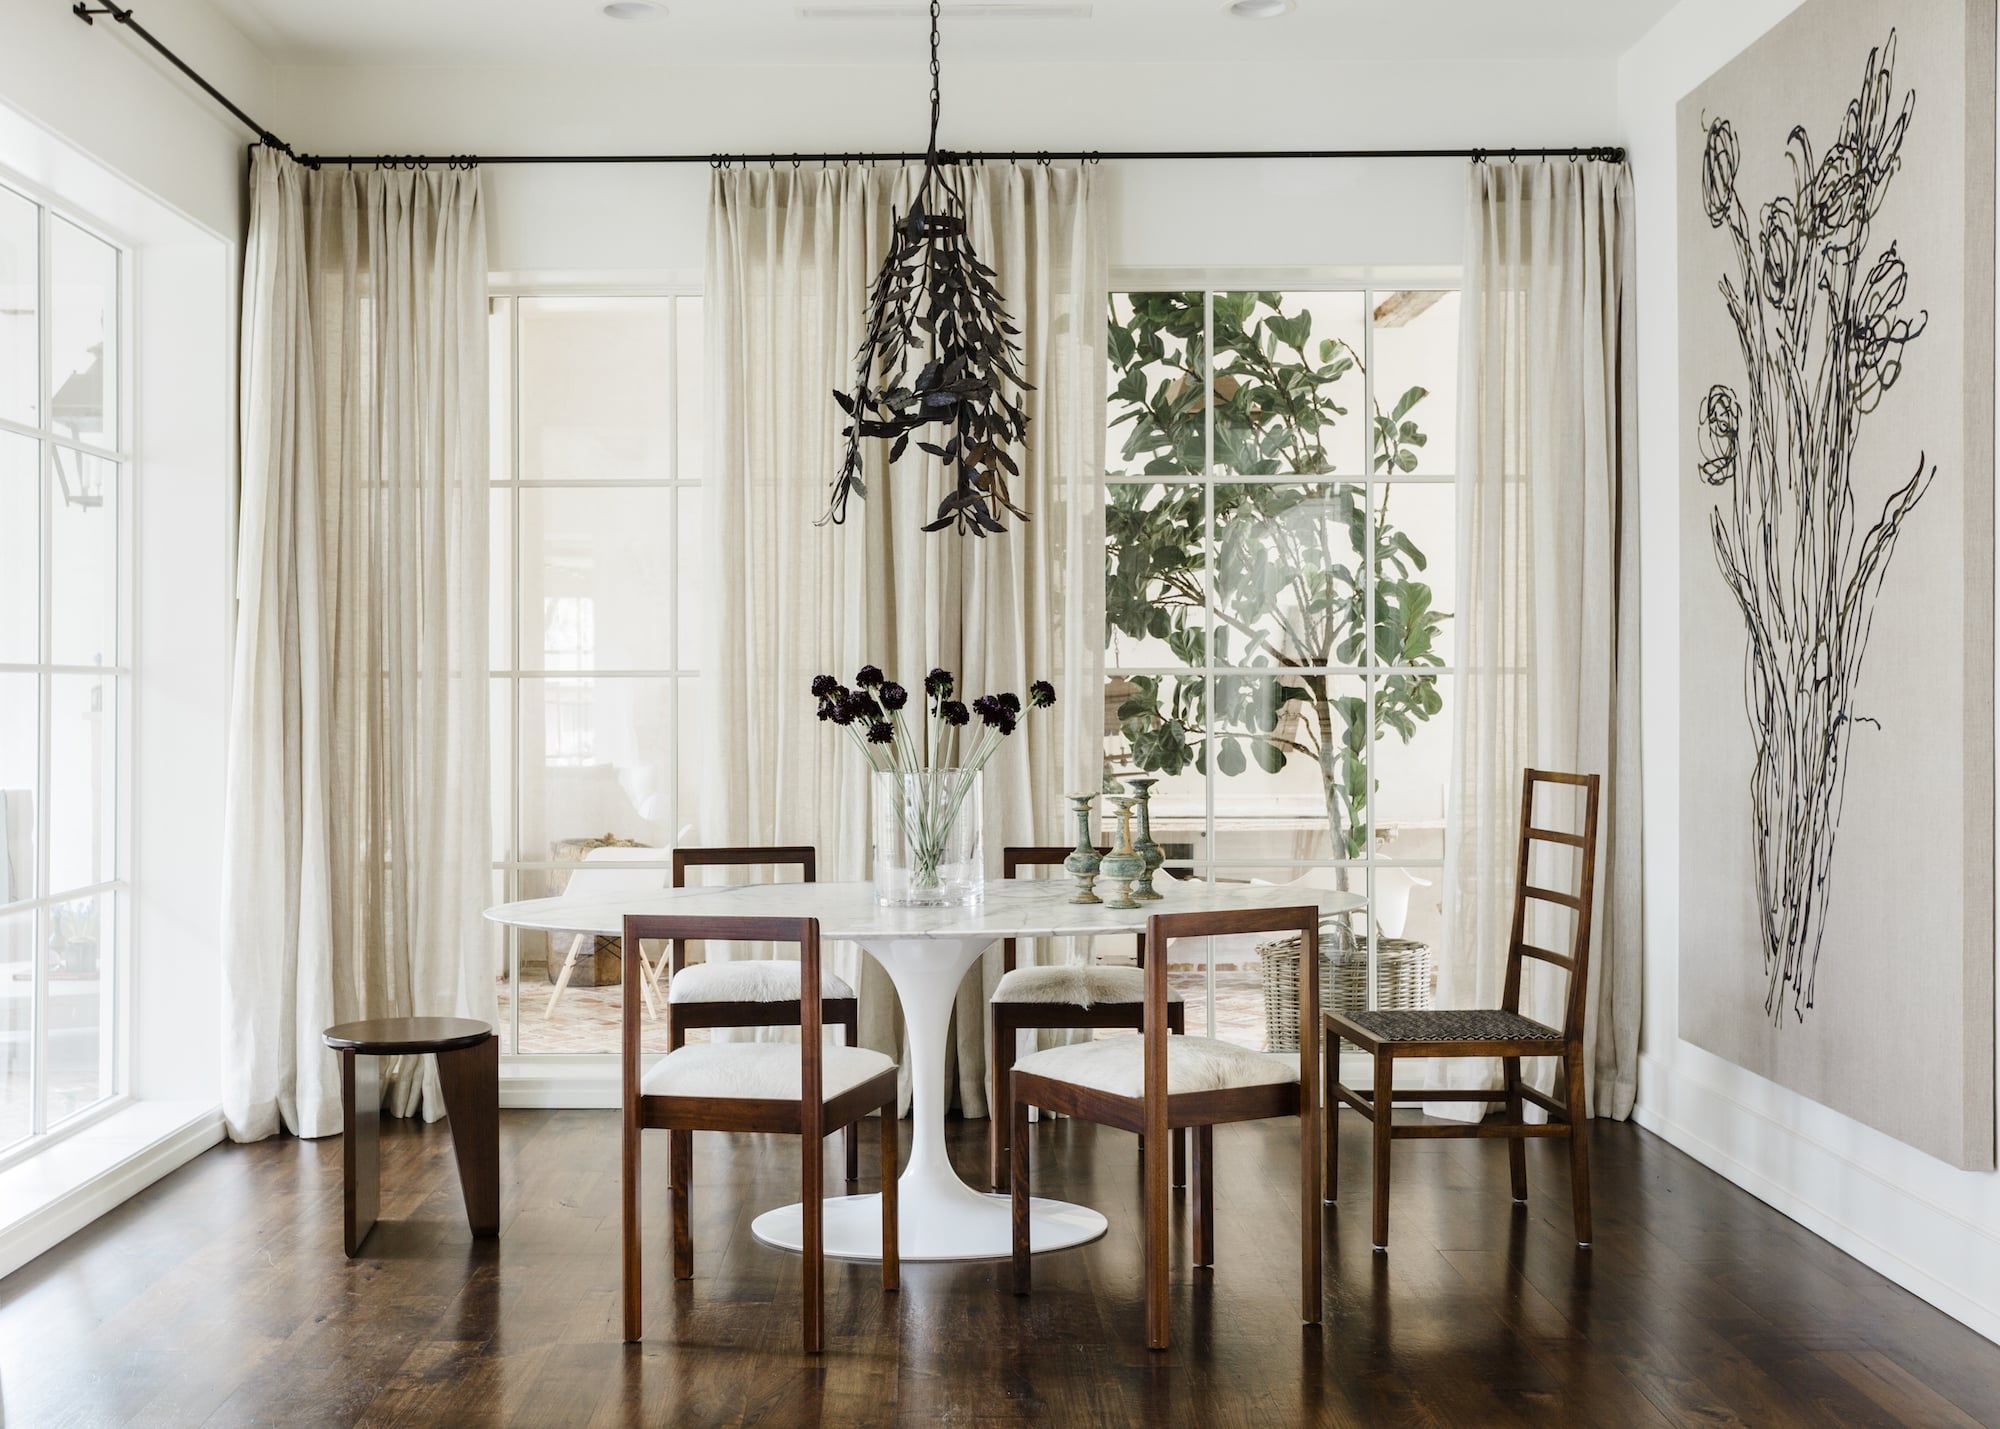 7 Designer Tips for Artfully Mismatching Your Dining Chairs